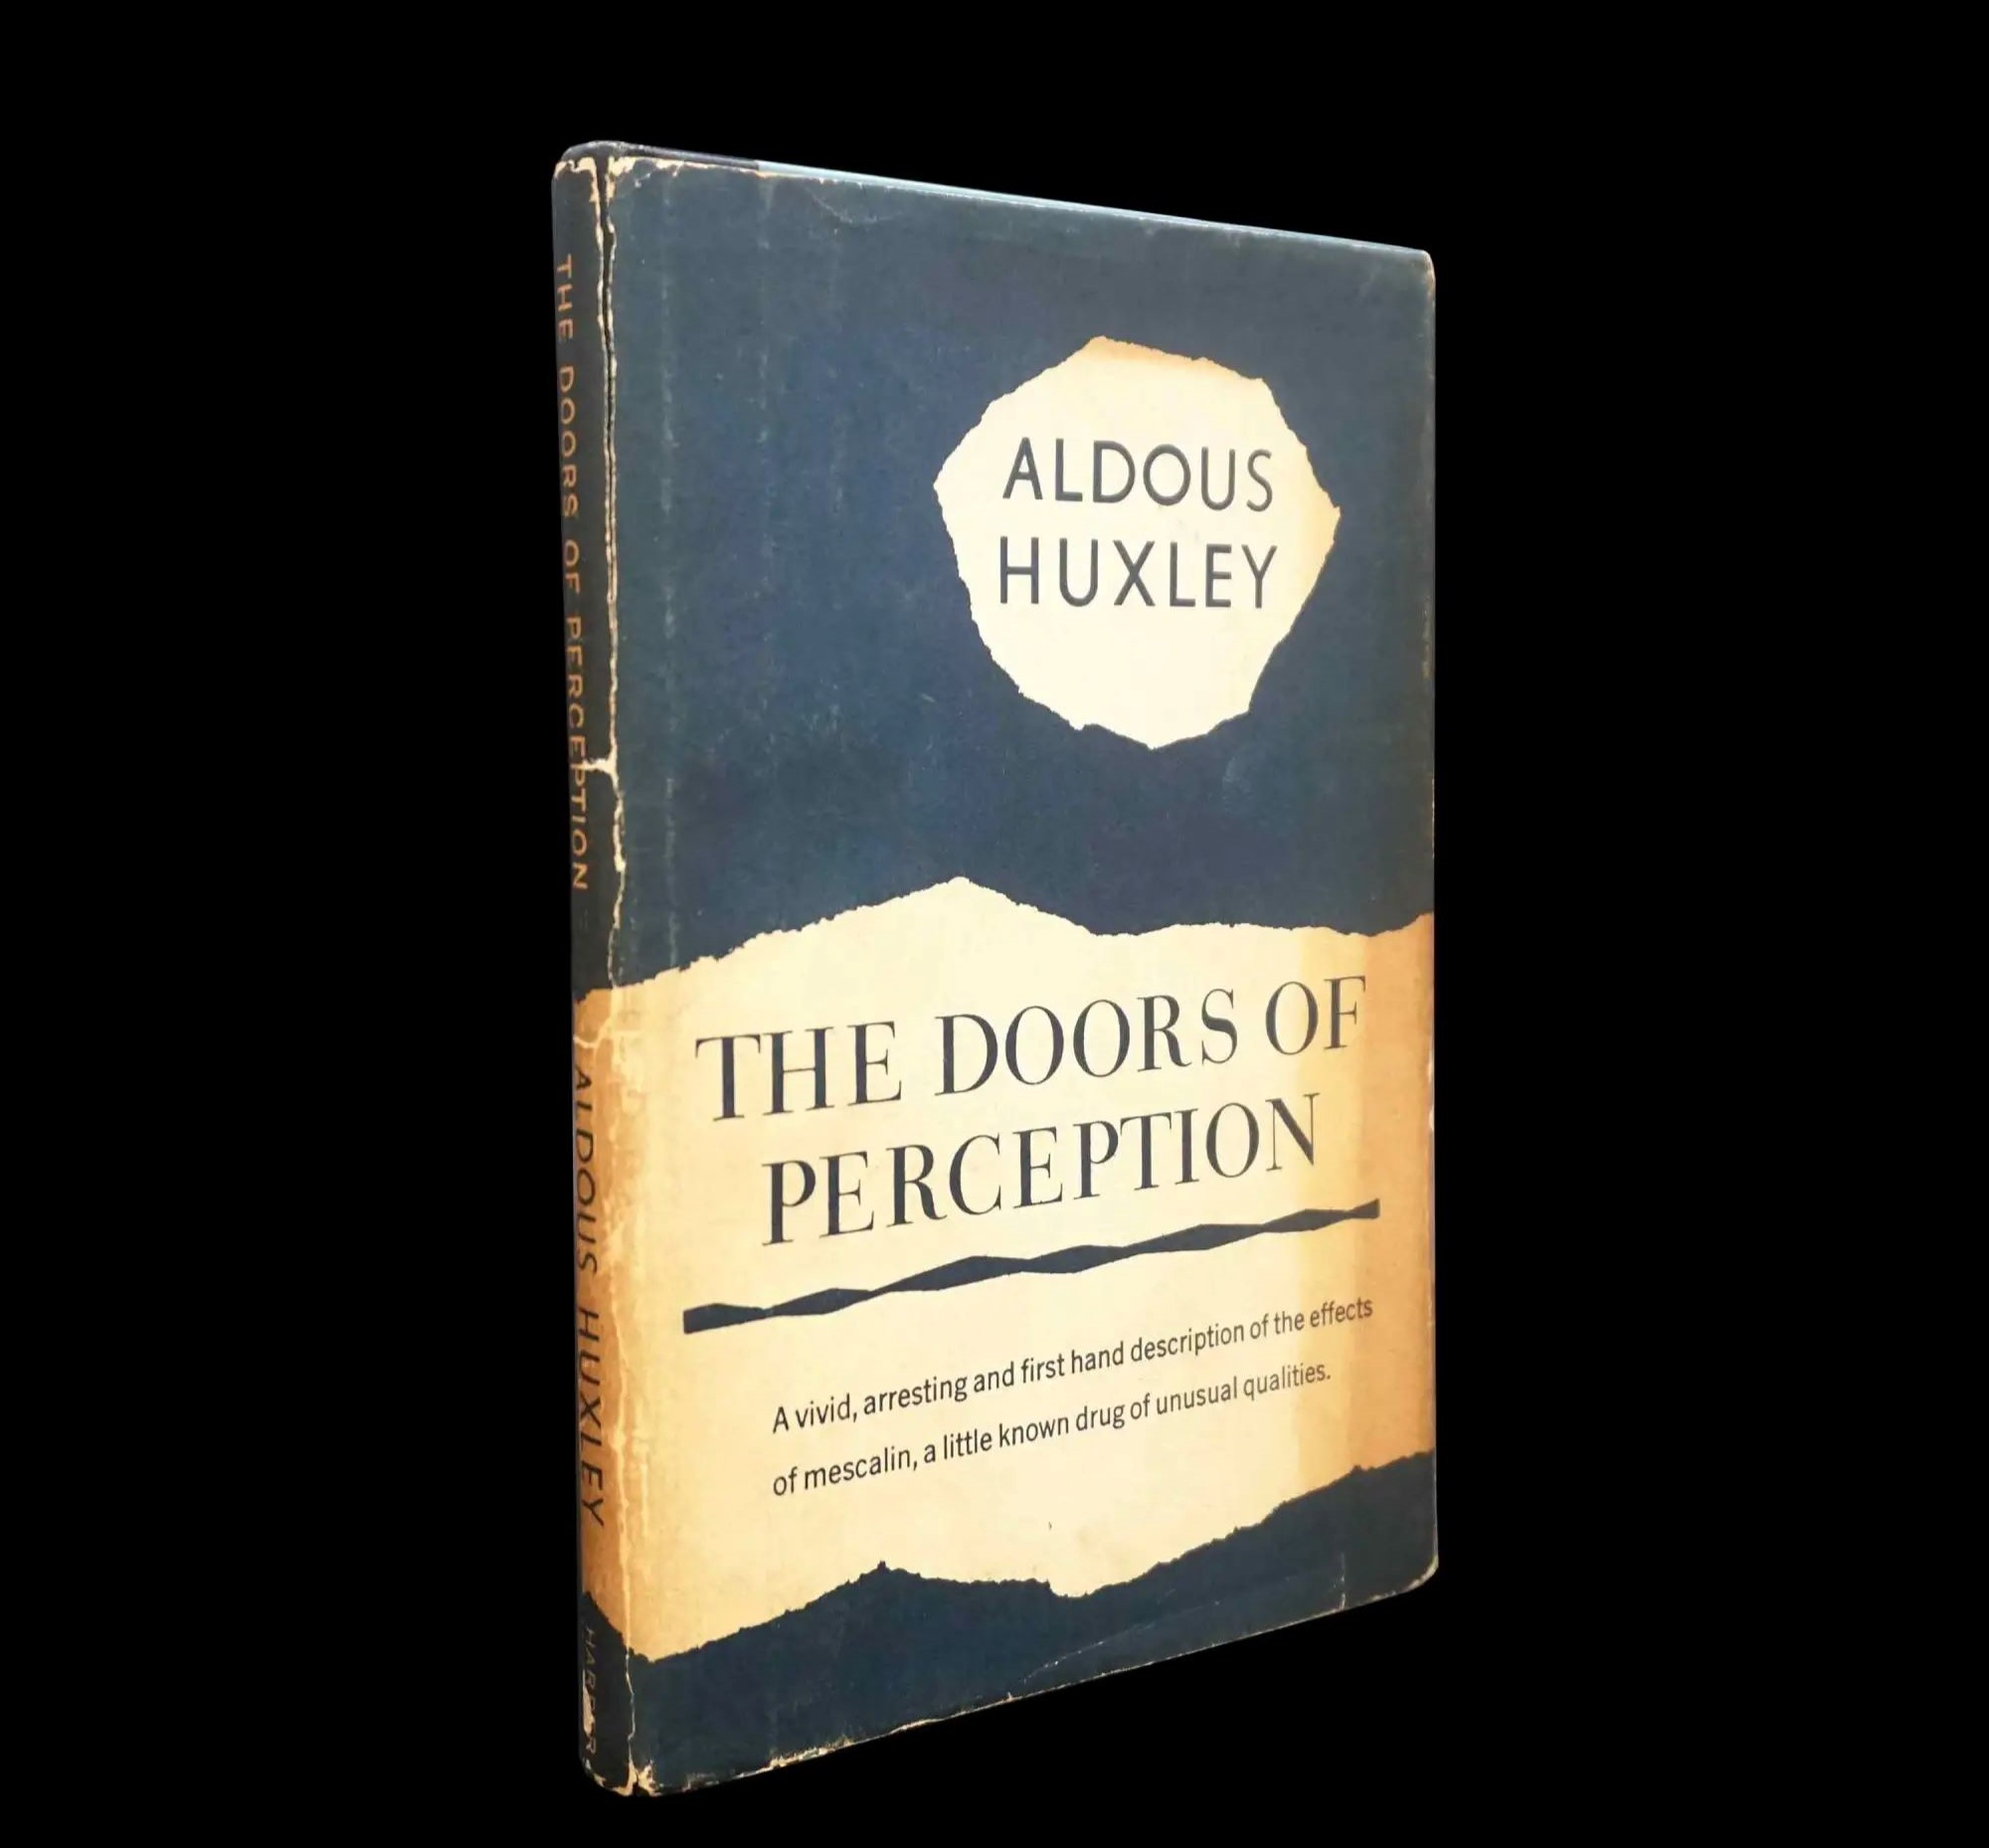 20-mind-blowing-facts-about-the-doors-of-perception-aldous-huxley